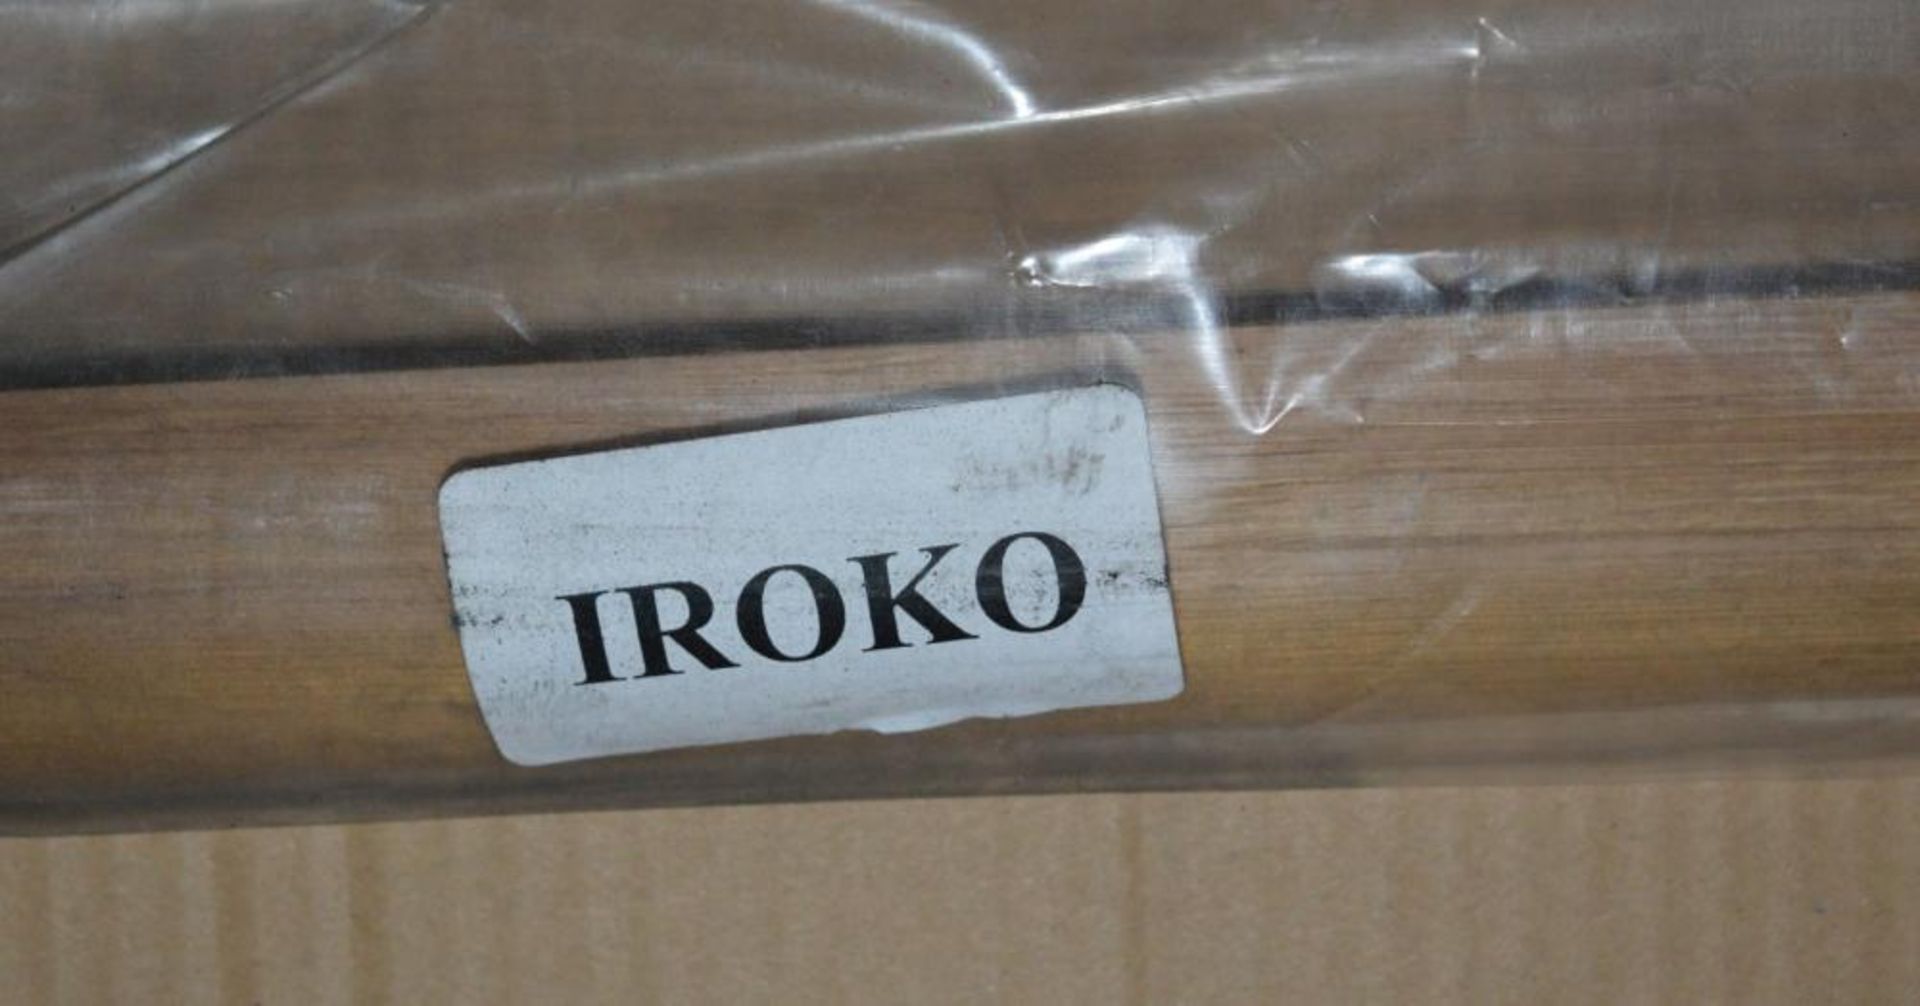 1 x Solid Wood Kitchen Worktop Upstand - IROKO - Size: 3000 x 40 x 18mm - Untreated - Brand New Seal - Image 6 of 6